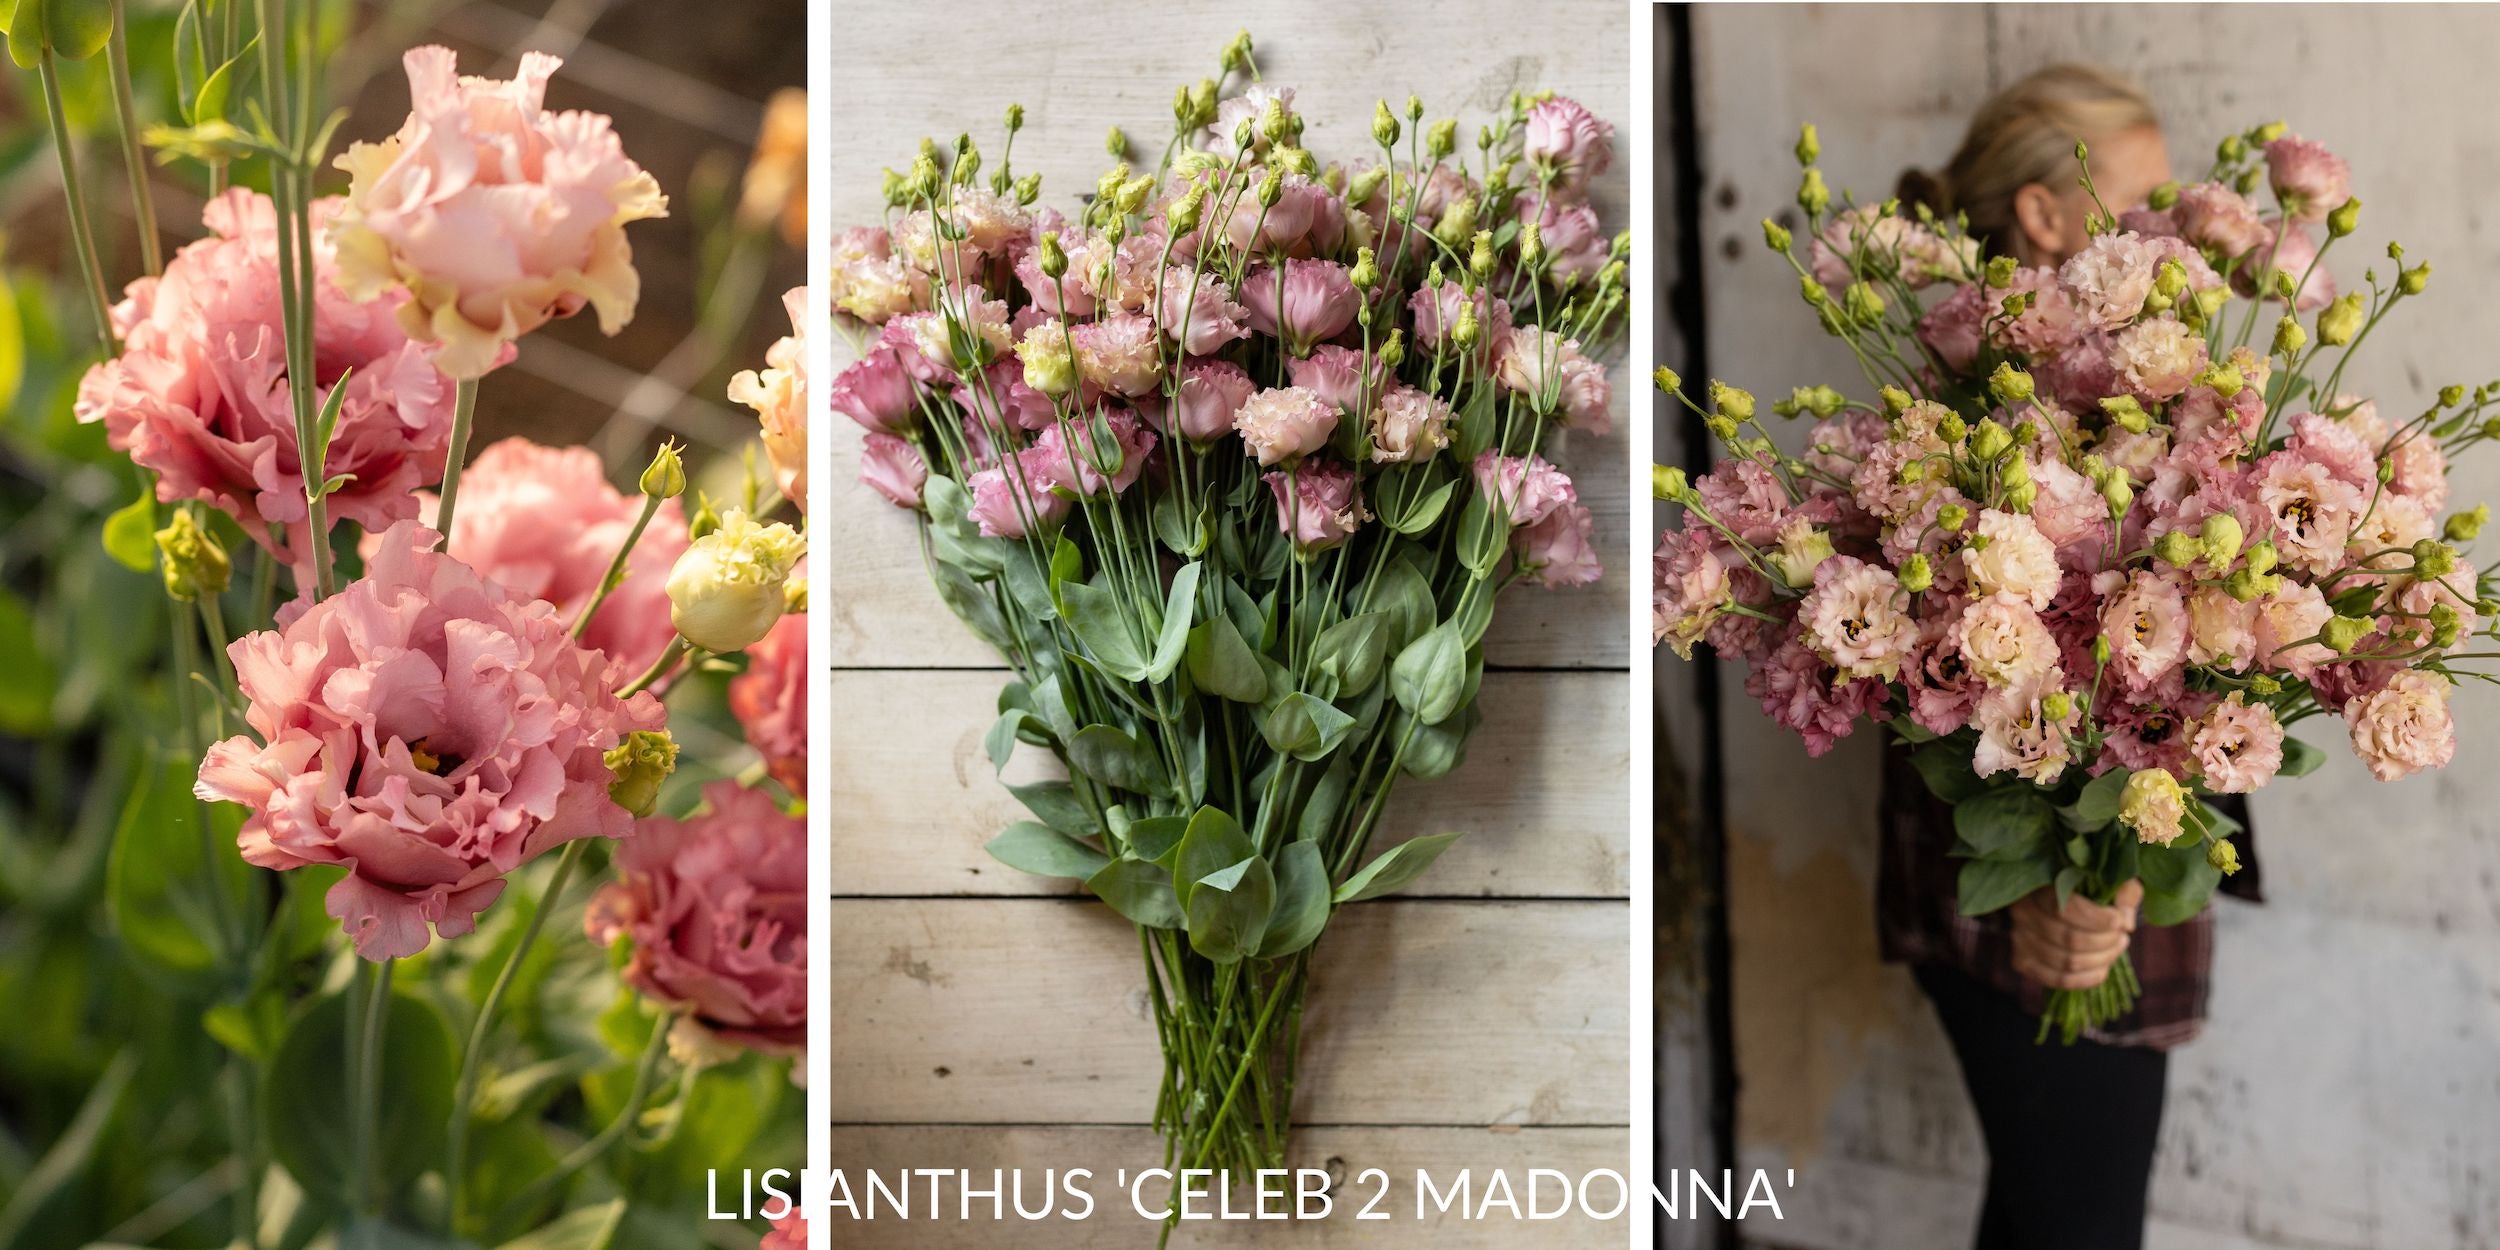 Lisianthus flowers in full bloom, displaying their delicate, ruffled petals and soft, varied colors.